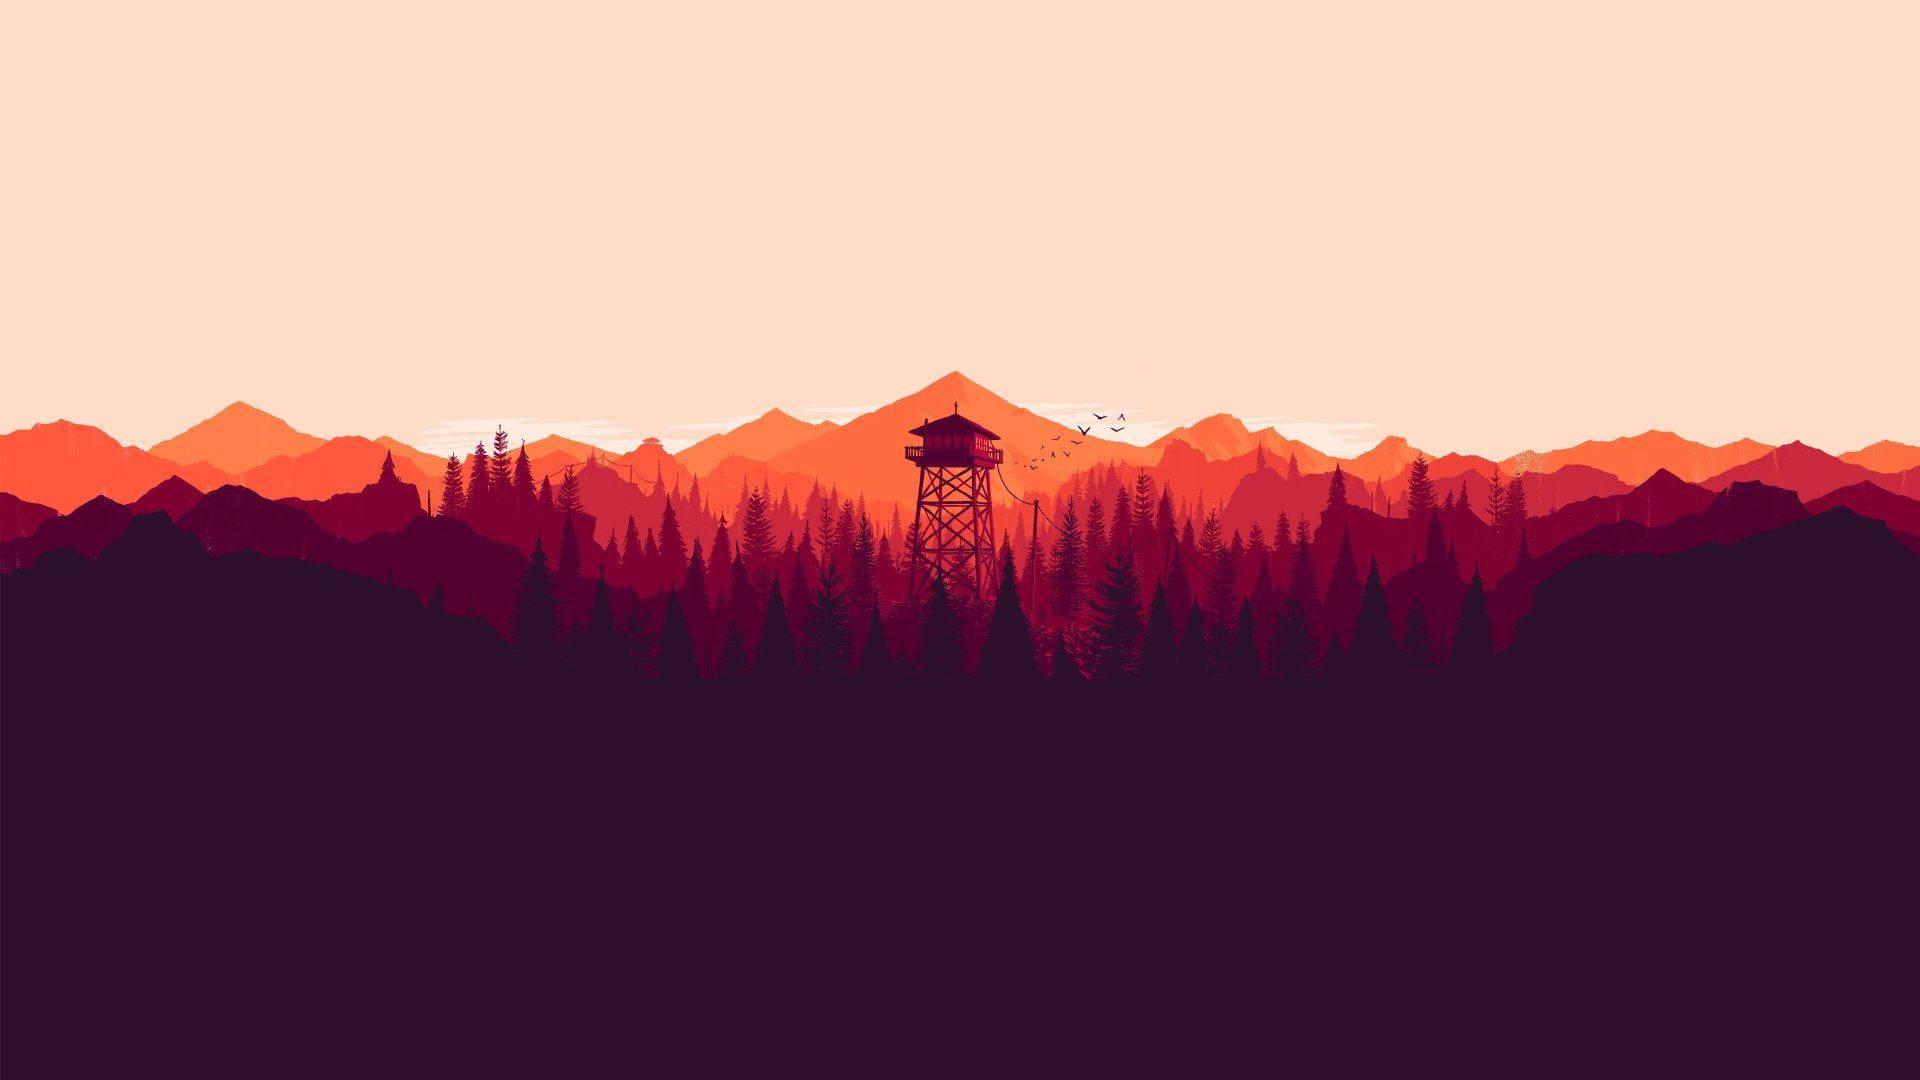 Top 999+ Firewatch Wallpaper Full HD, 4K✅Free to Use